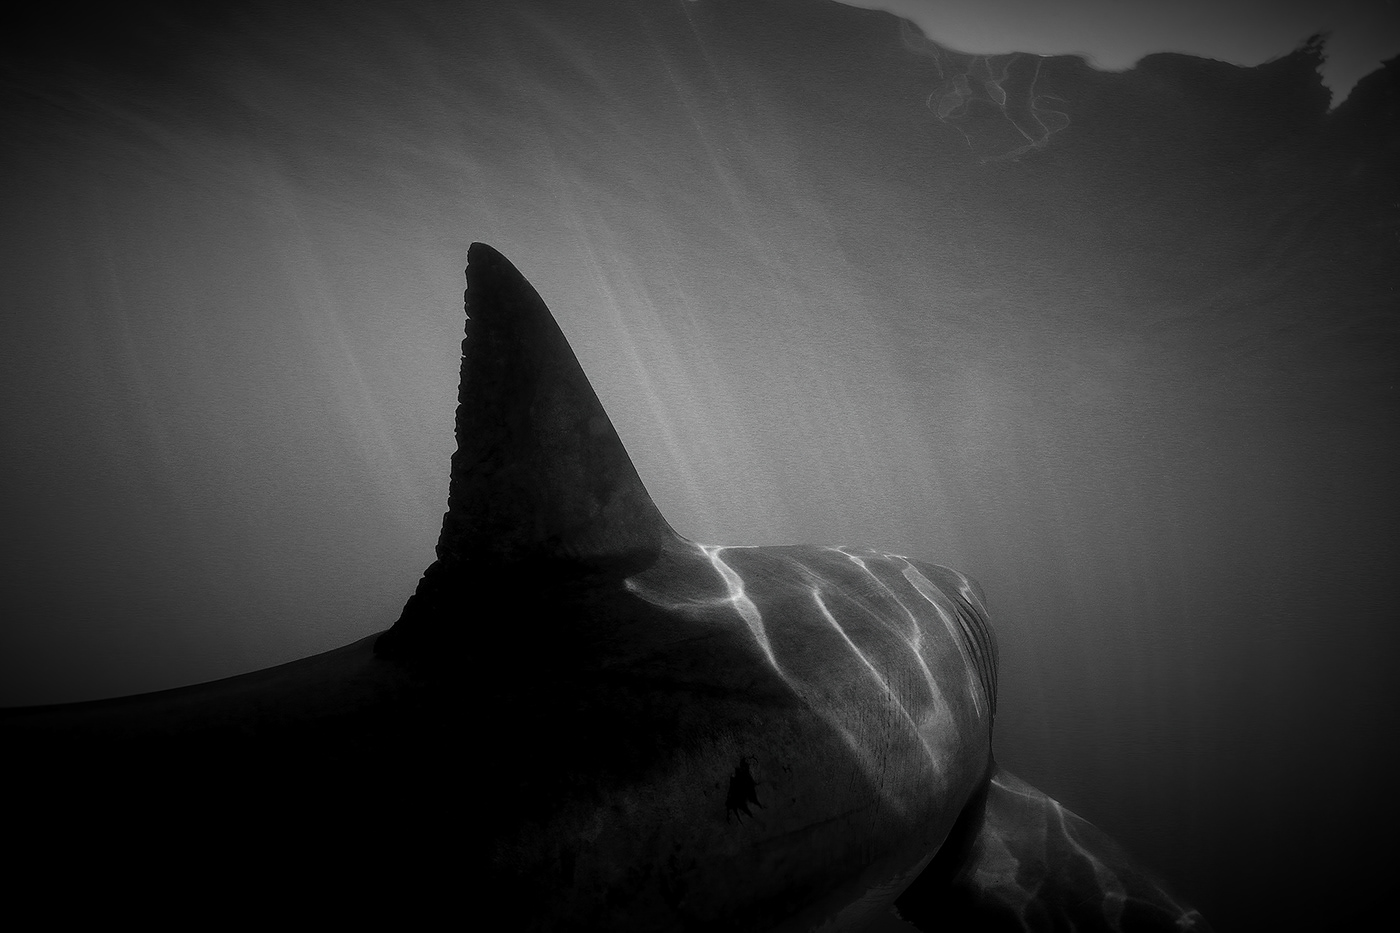 Carcharodon carcharias great white shark marine conservation sharks UNDERWATER PHOTOGRAPHY wildlife art wildlife conservation Wildlife photography